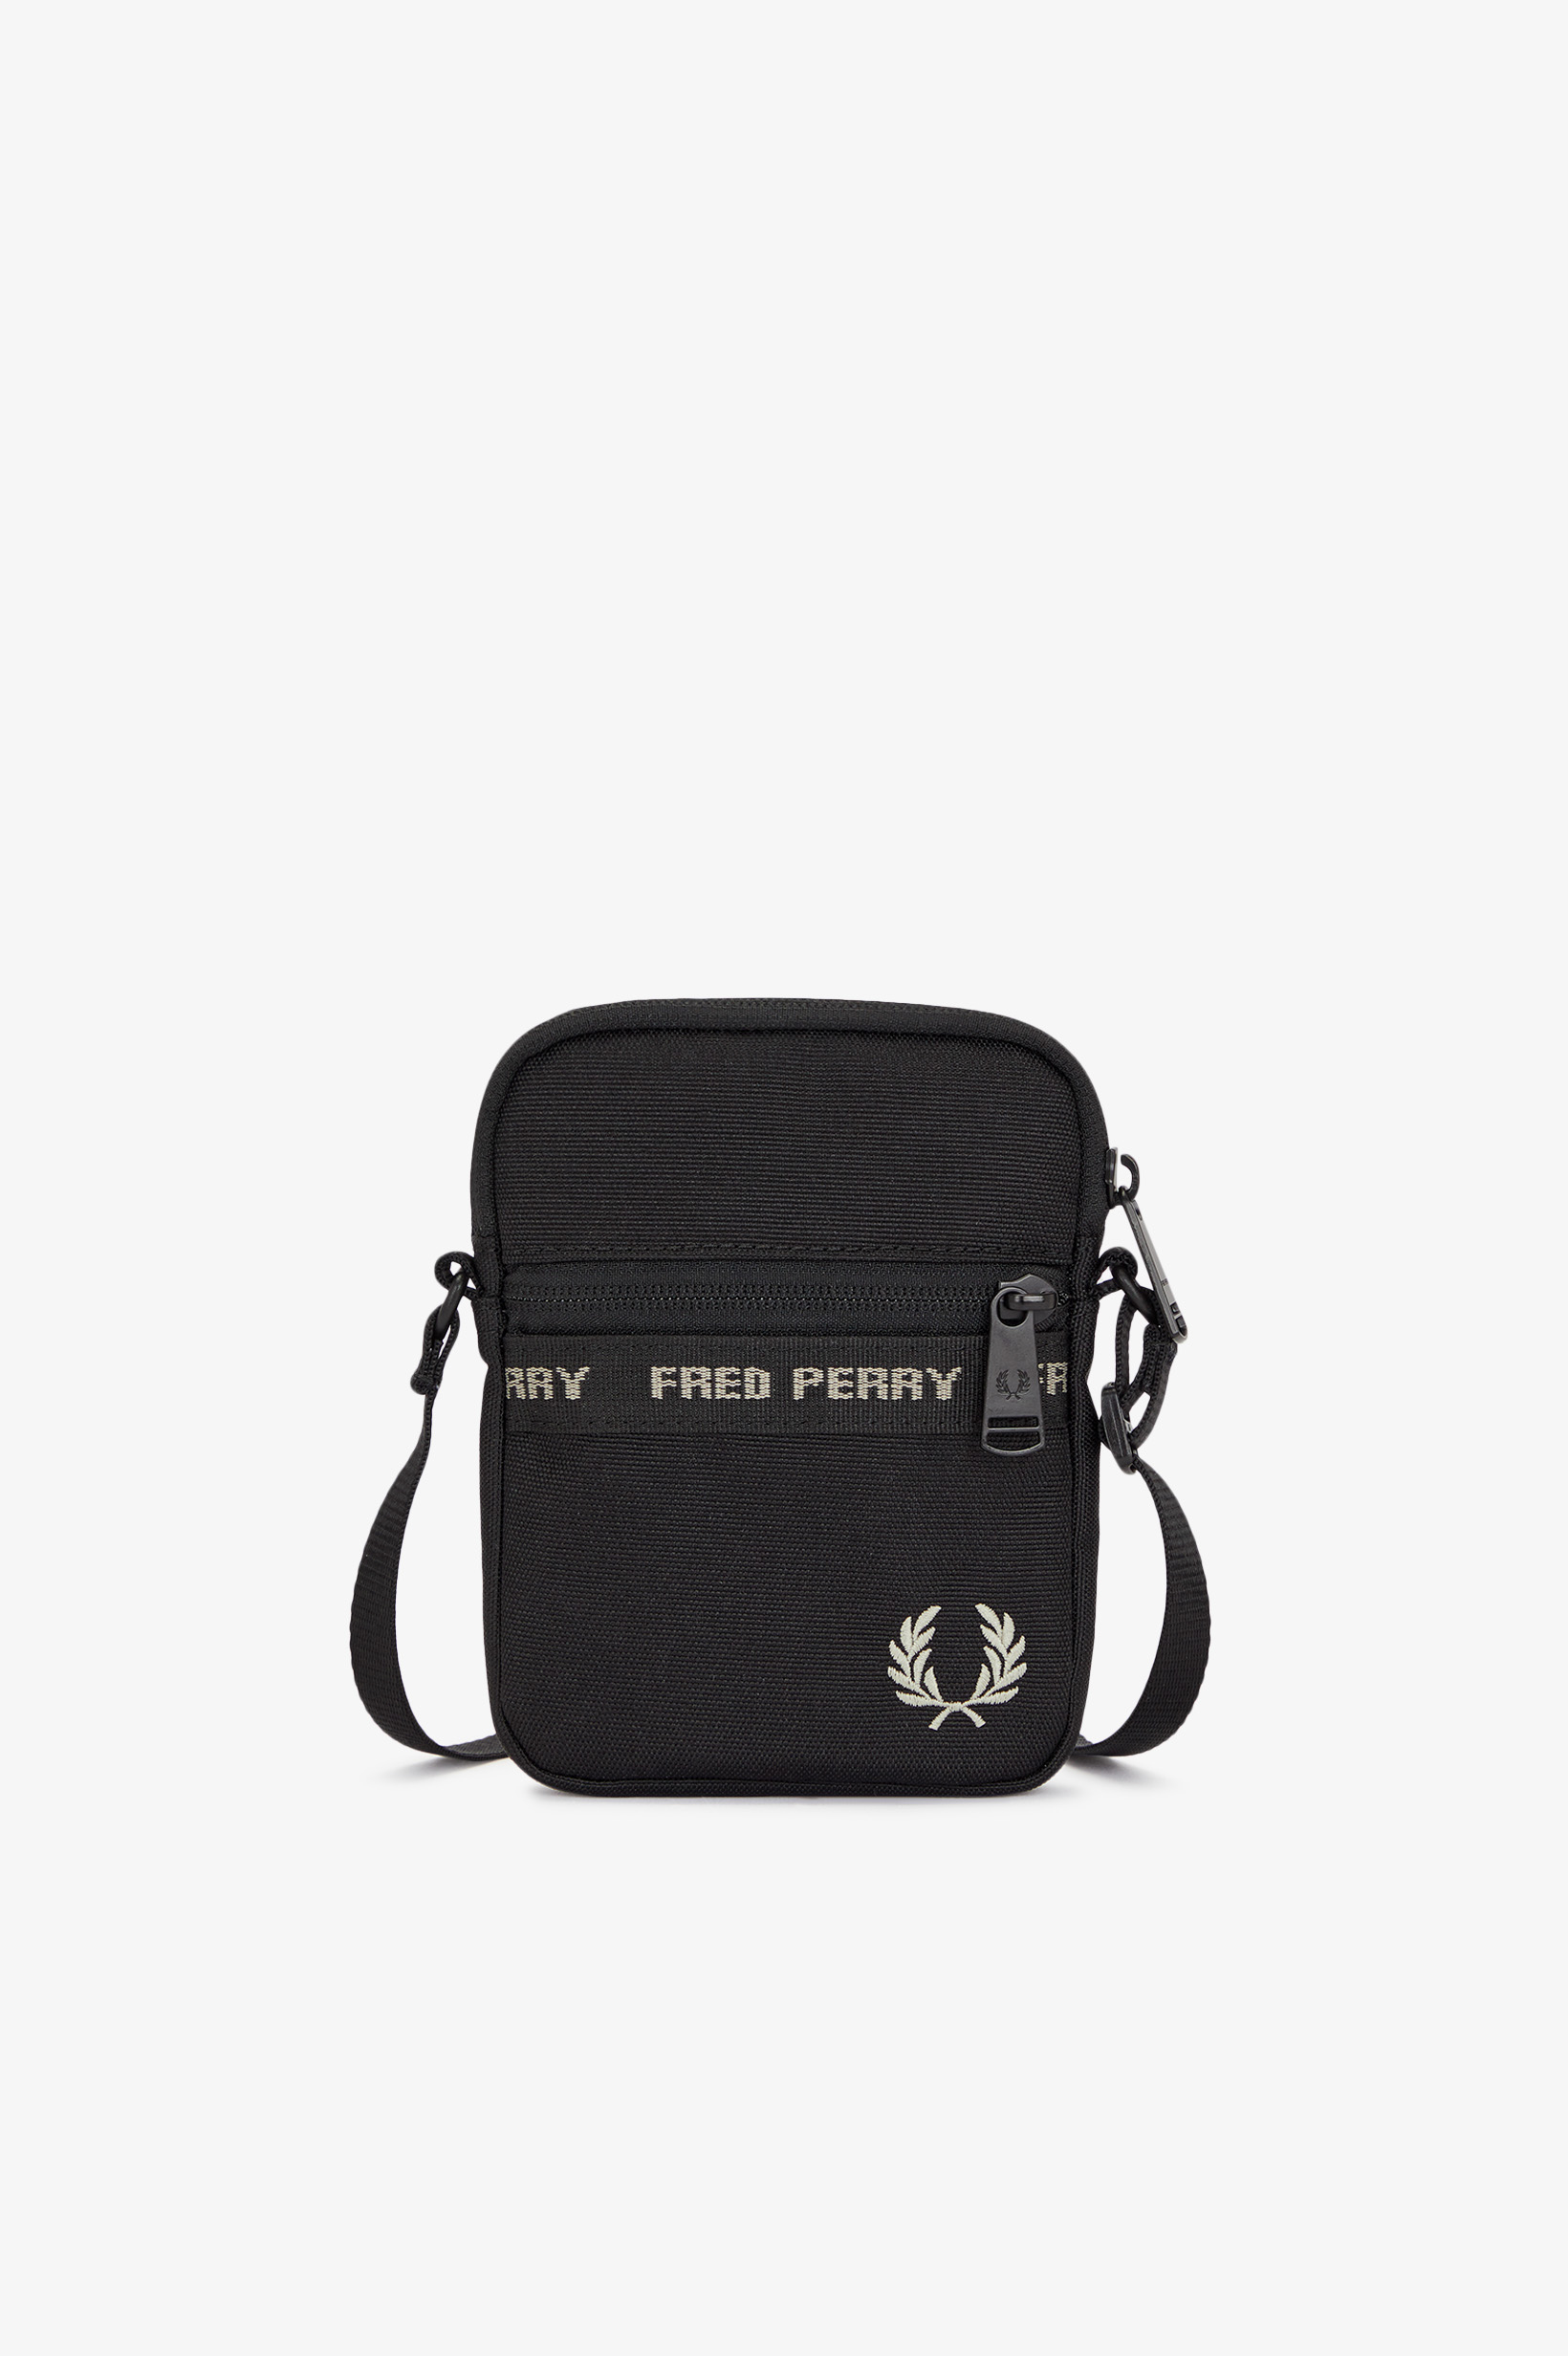 Fred Perry - FP TAPED SIDE BAG - Black/Warm Grey